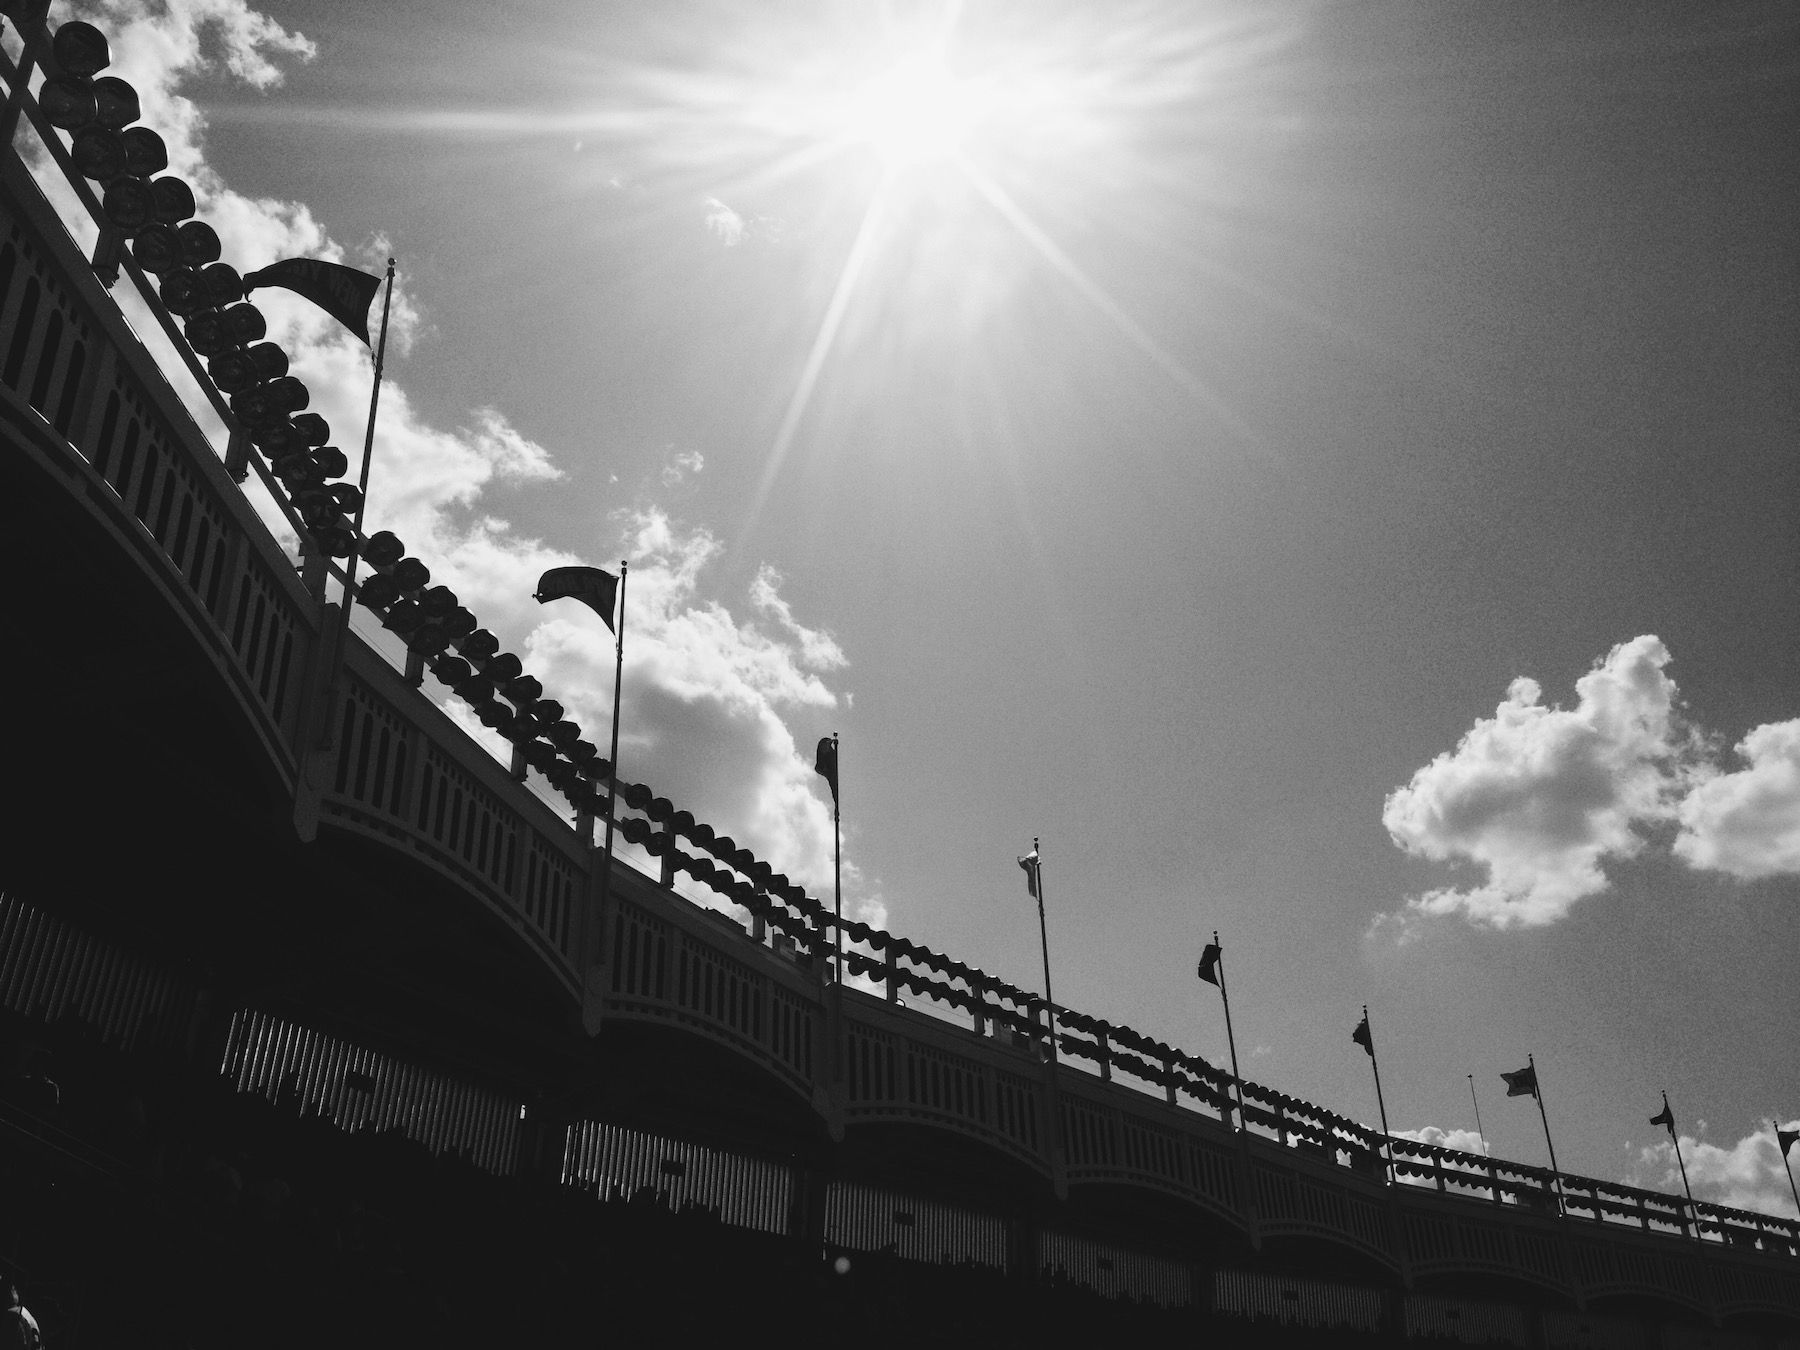 Black and white, stadium flags and trim, sun flare and clouds.